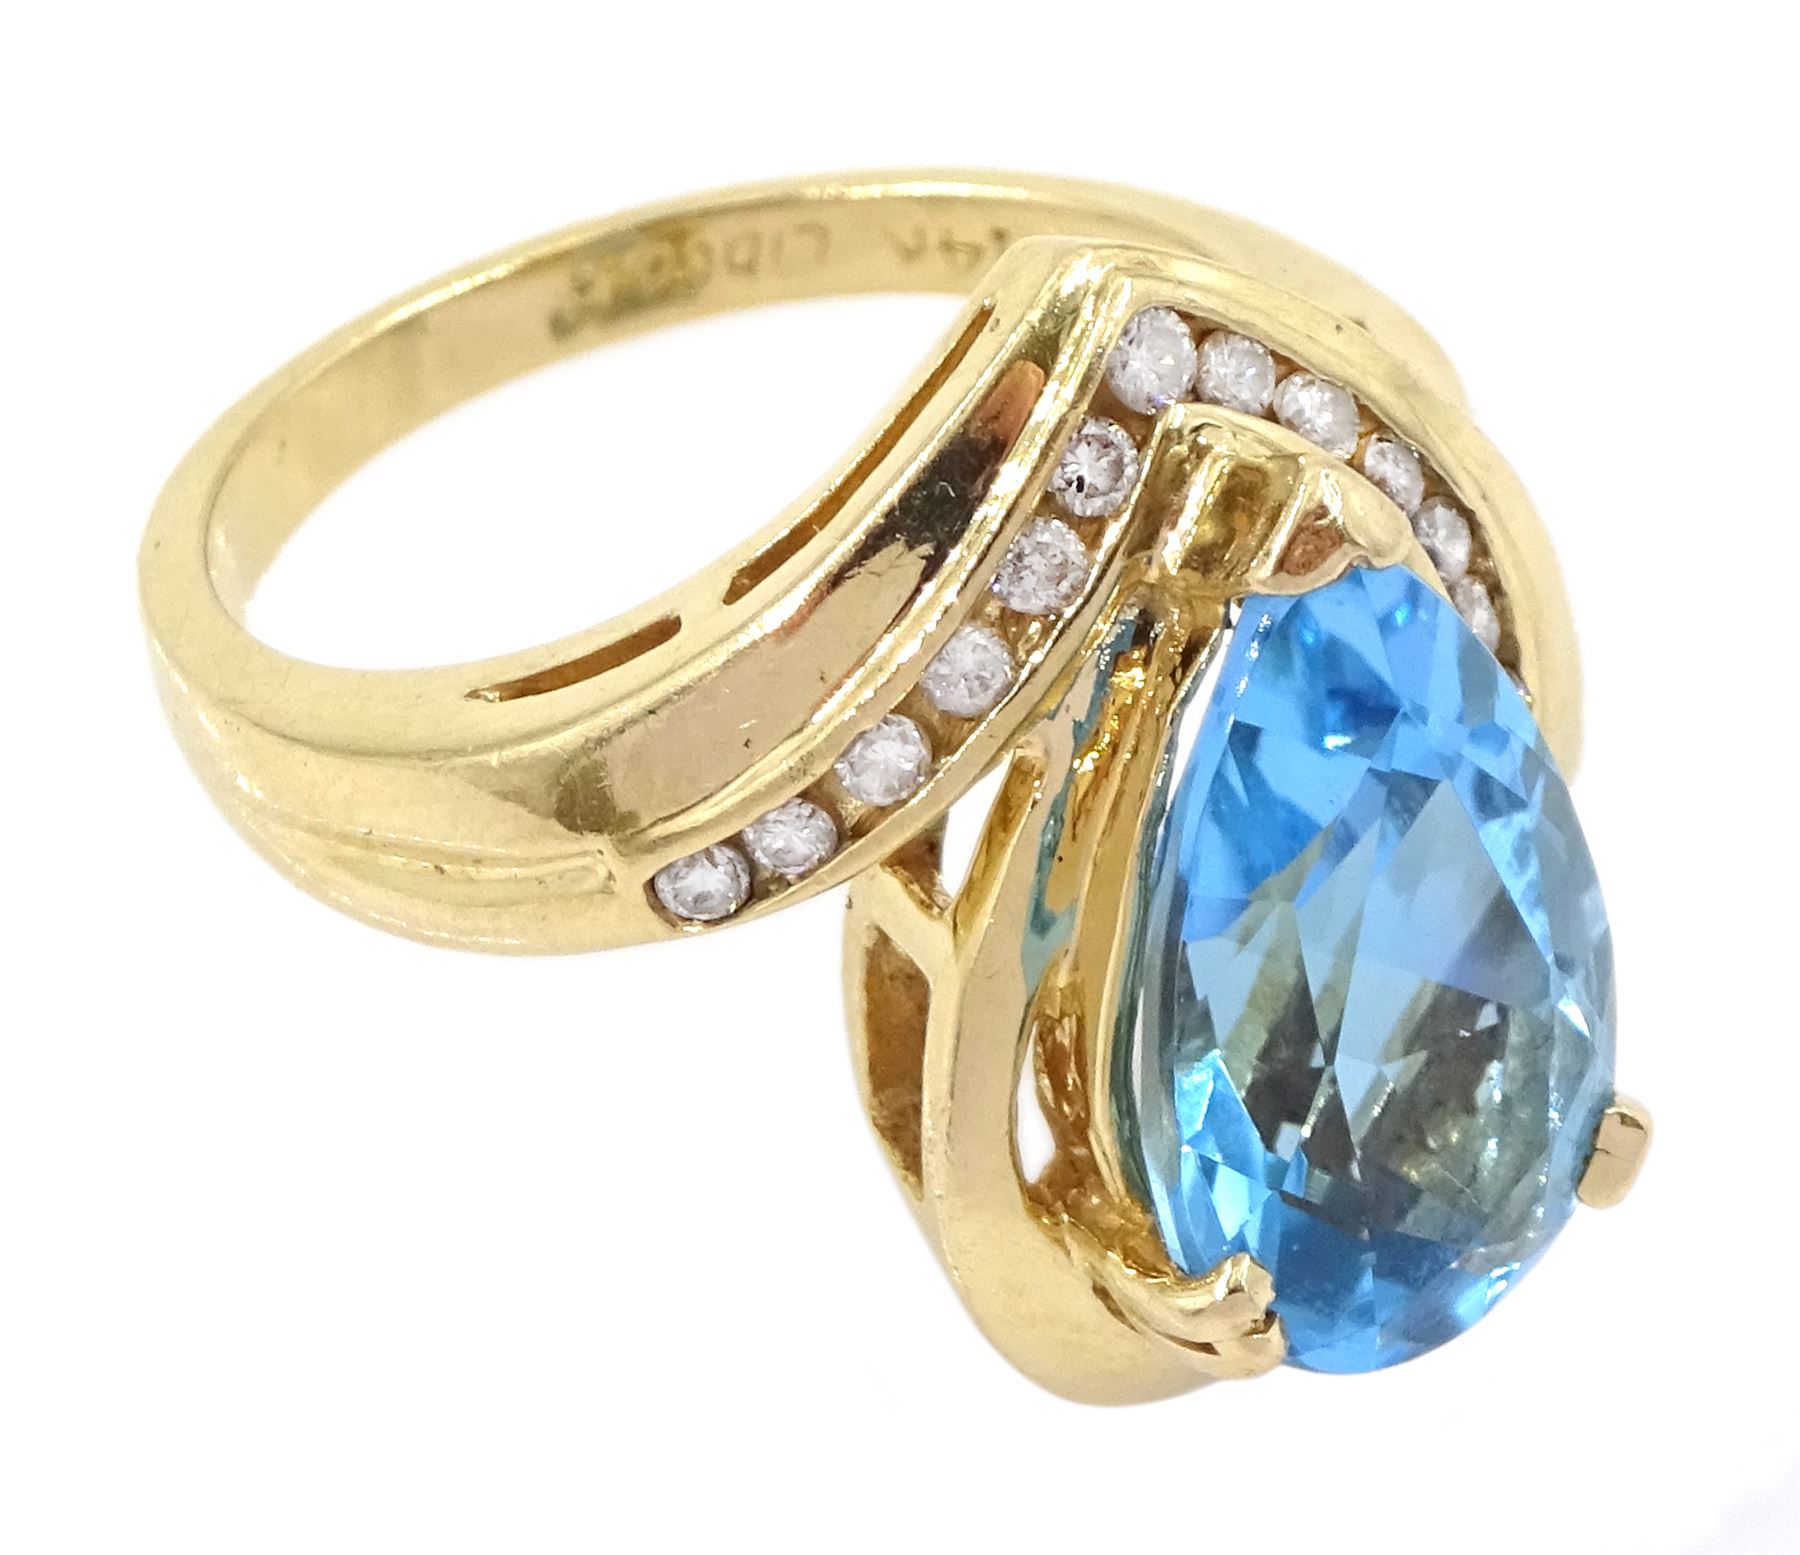 14ct gold pear cut blue topaz and round brilliant cut diamond ring - Image 3 of 4